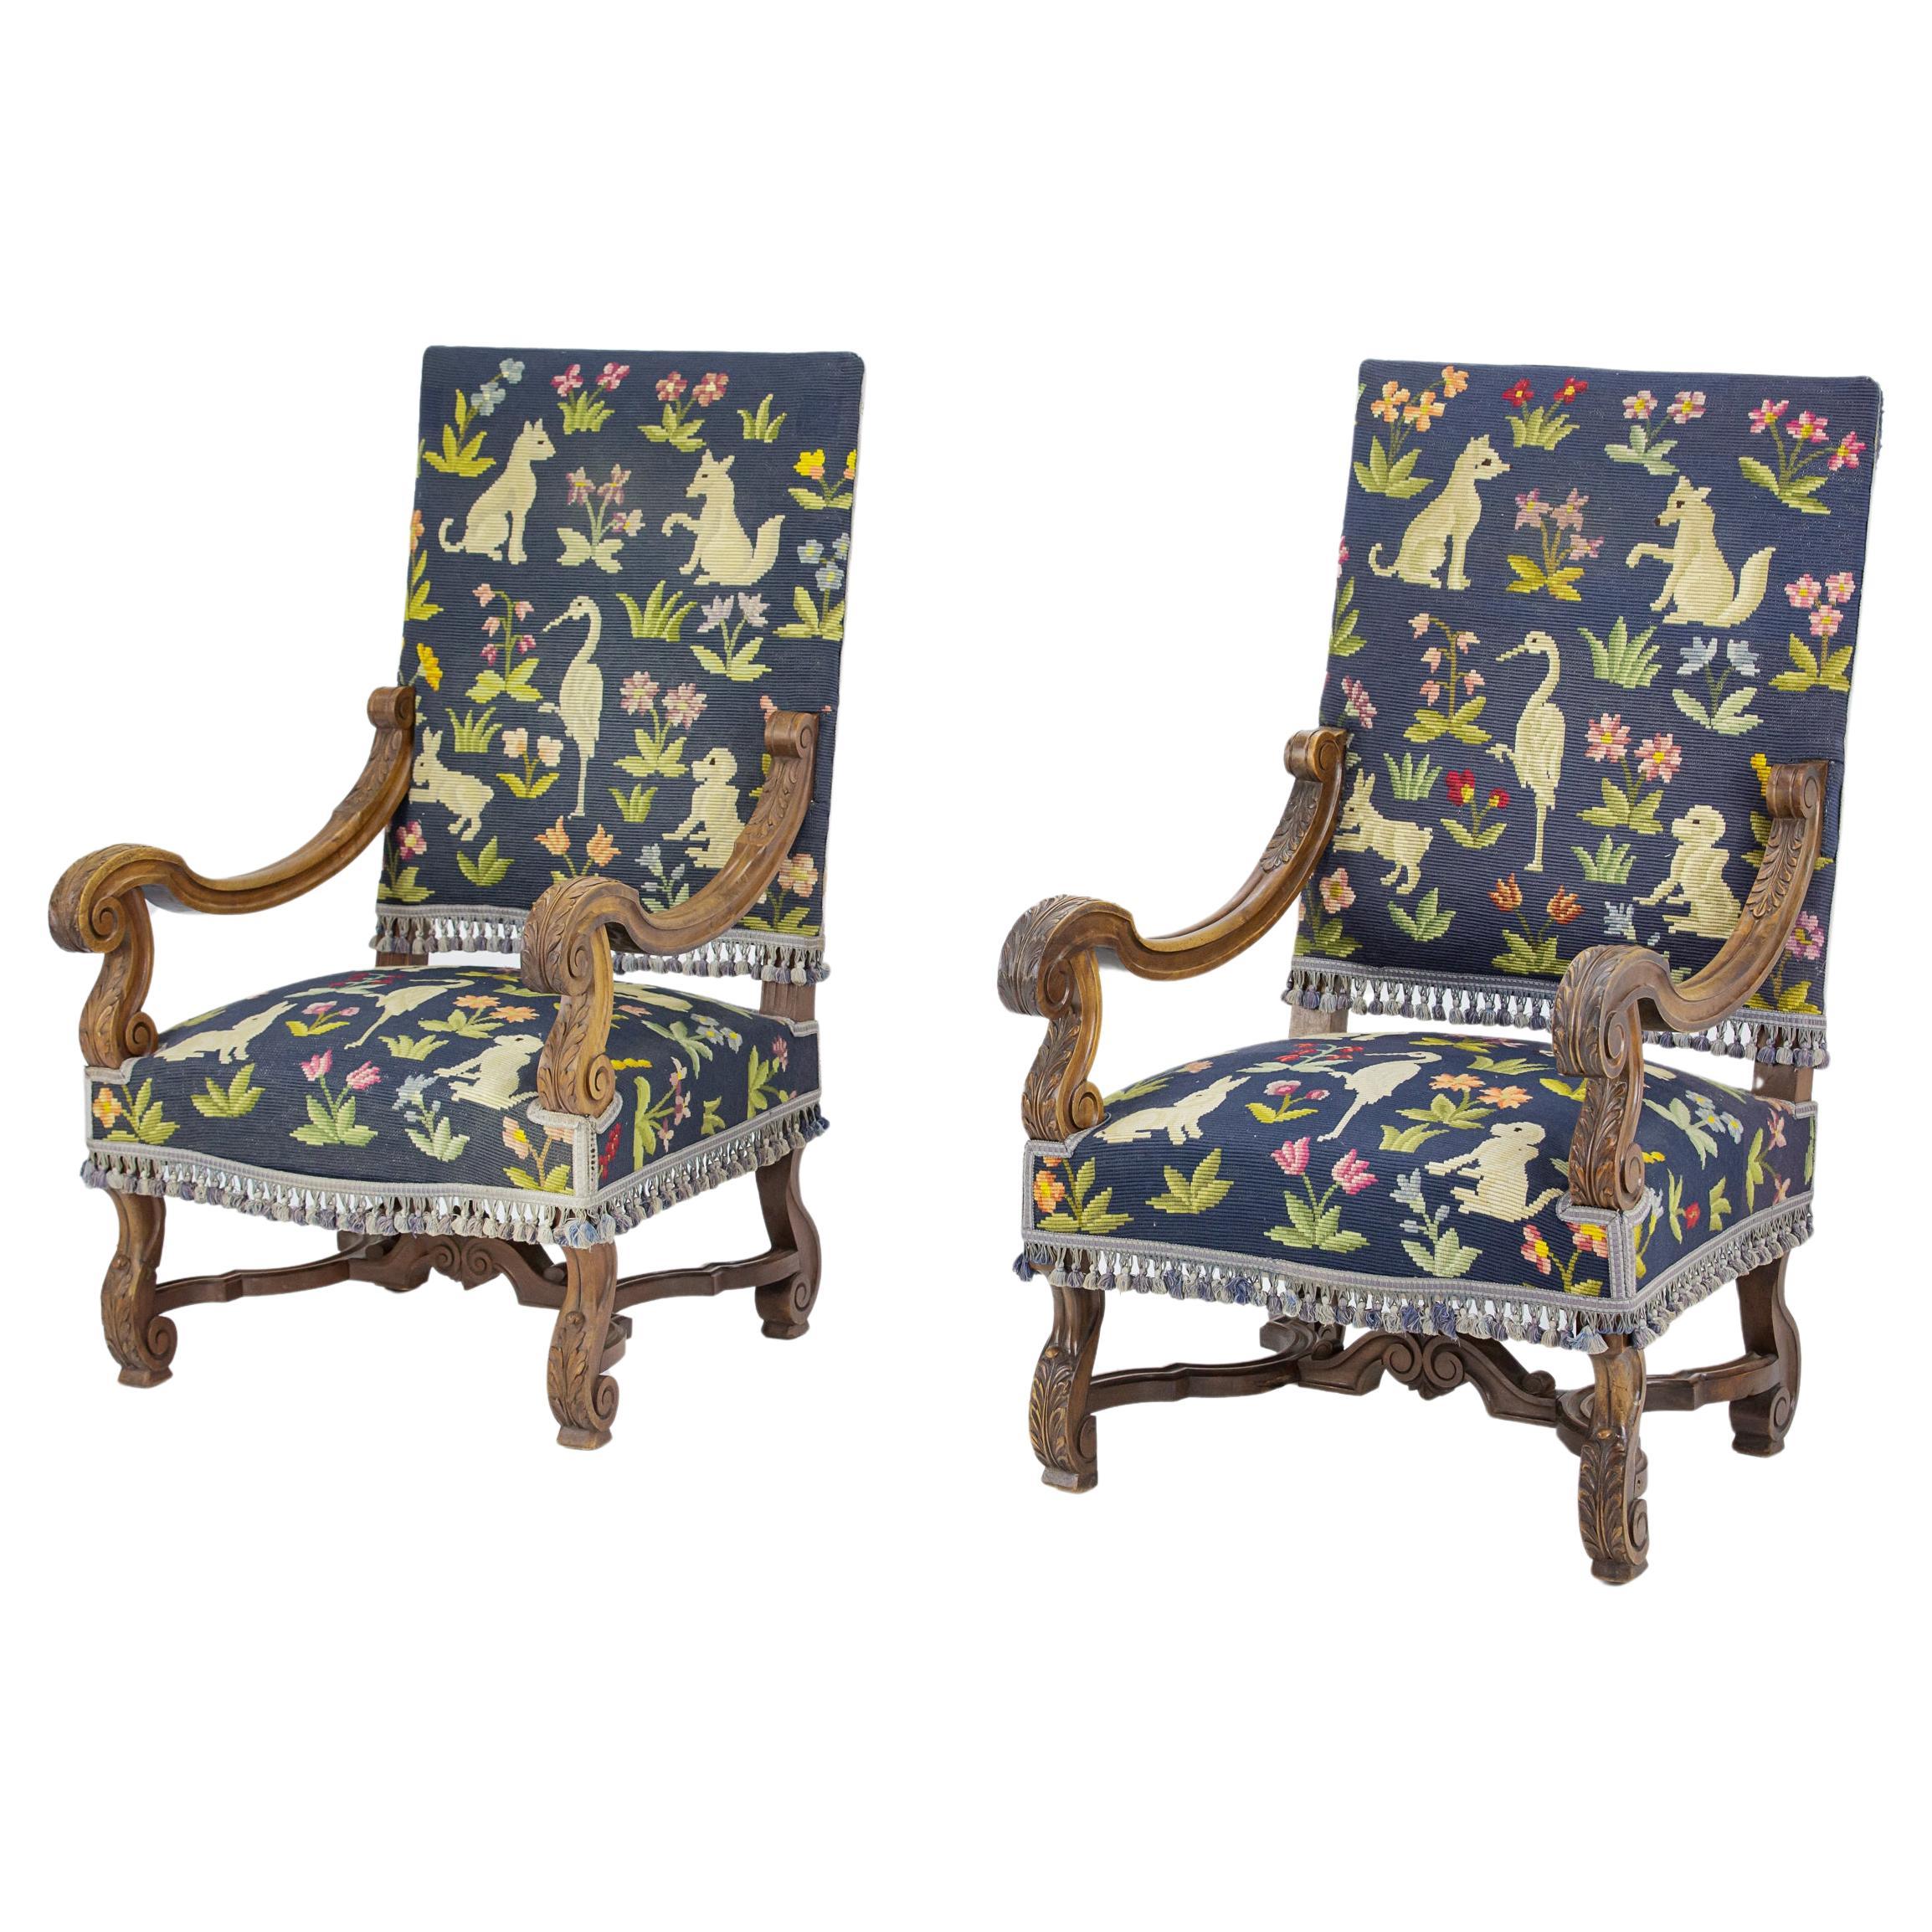 Pair of Large Open Armchairs with Original Primitive Needlepoint Upholstery